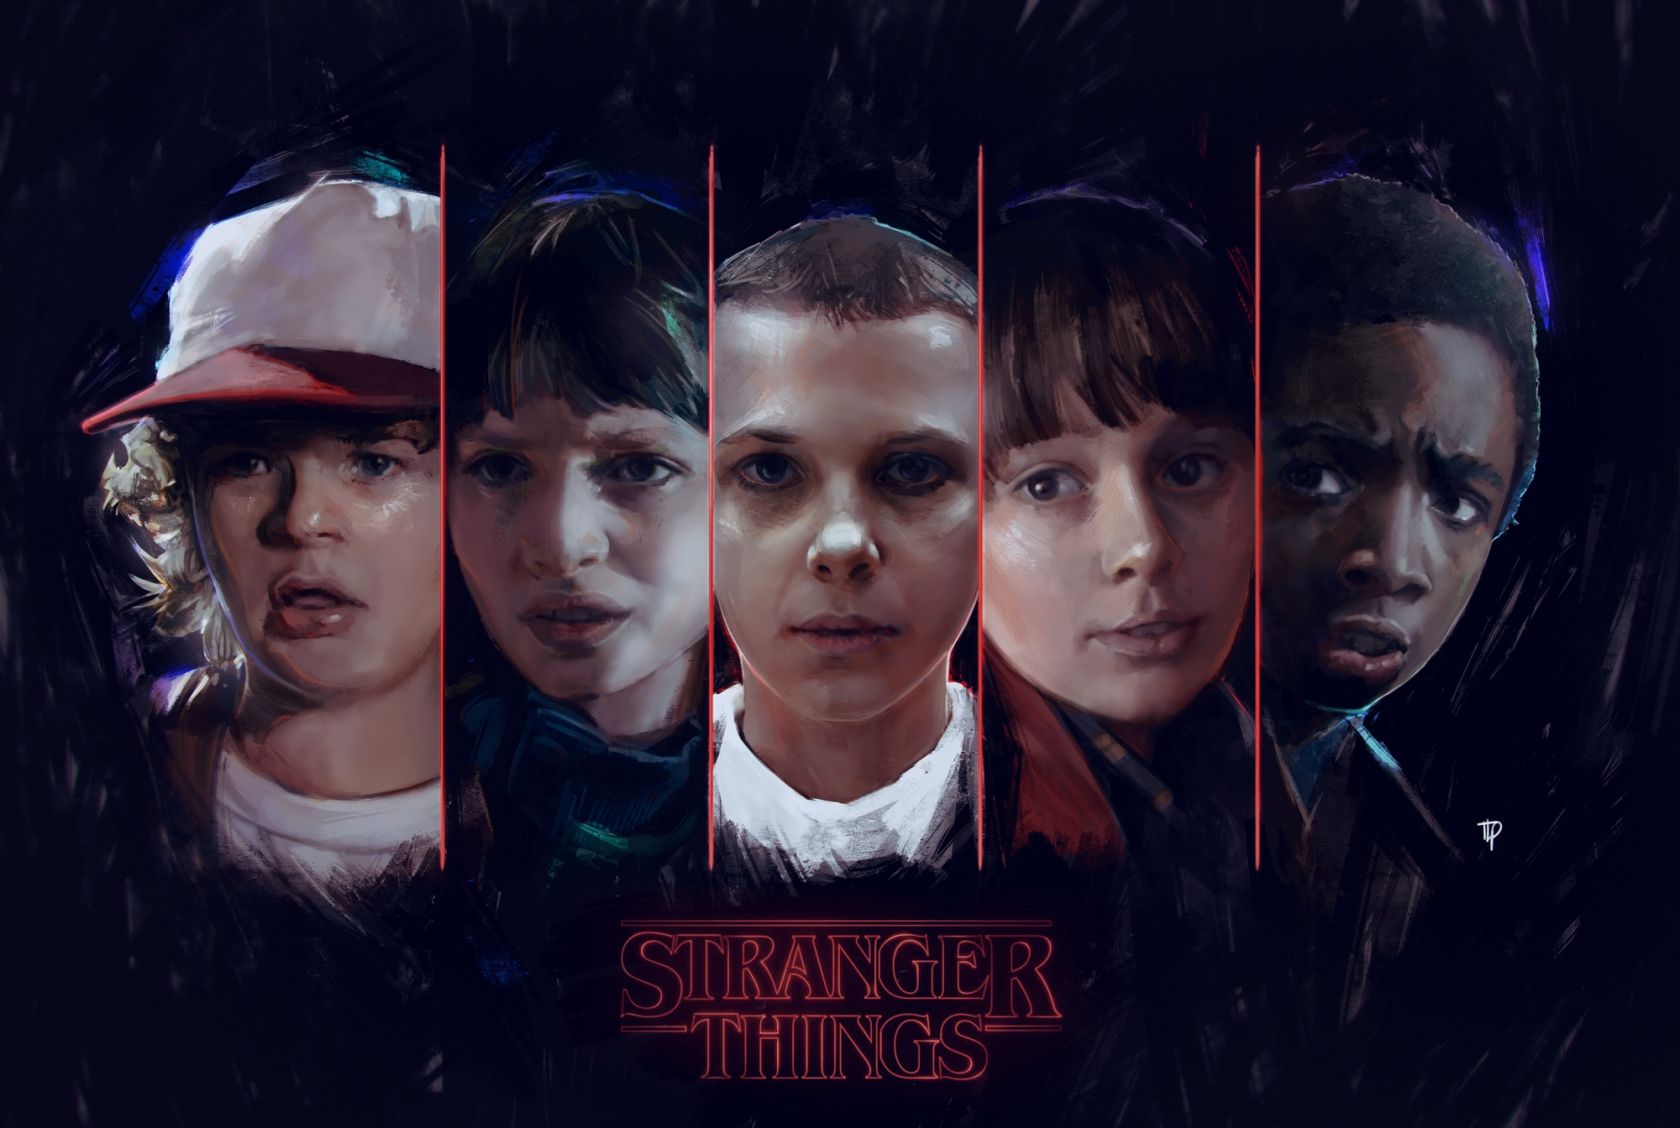 Stranger Things' Meets 'The Shining' In Netflix's New Series